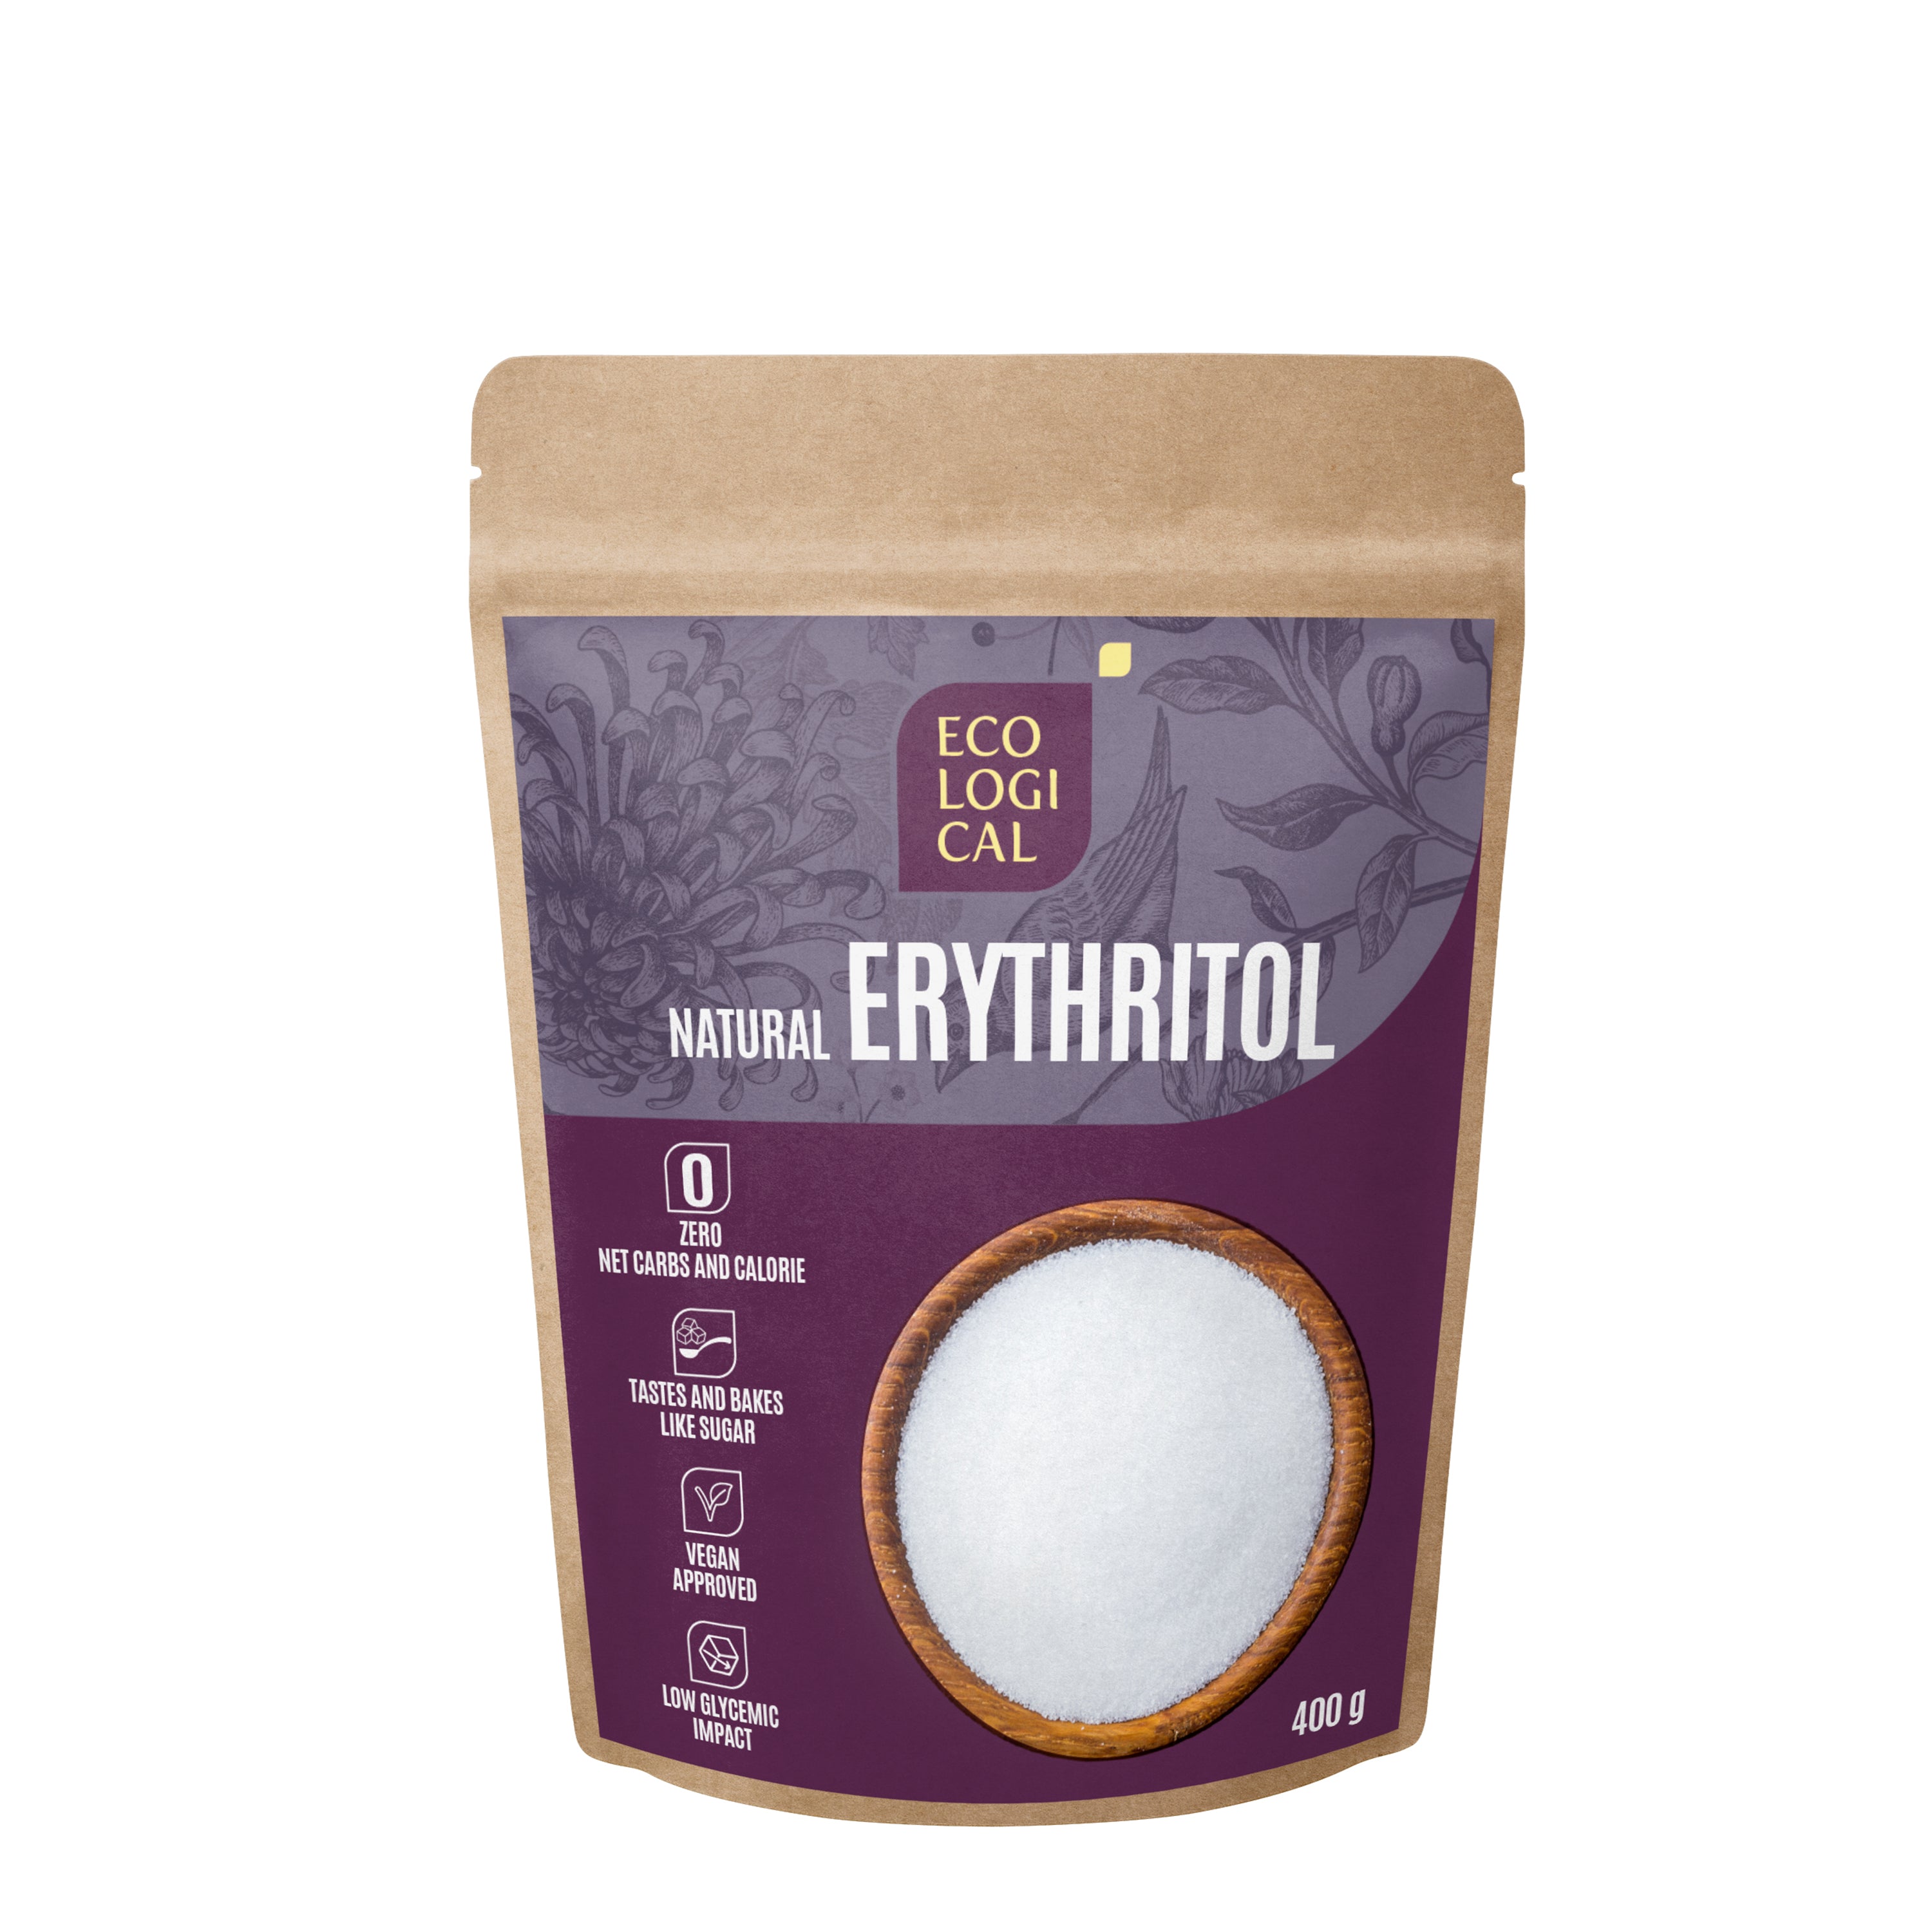 Pure ECOLOGICAL Natural Erythritol, 400g - Zero-Calorie Sweetener for Health-Conscious Living